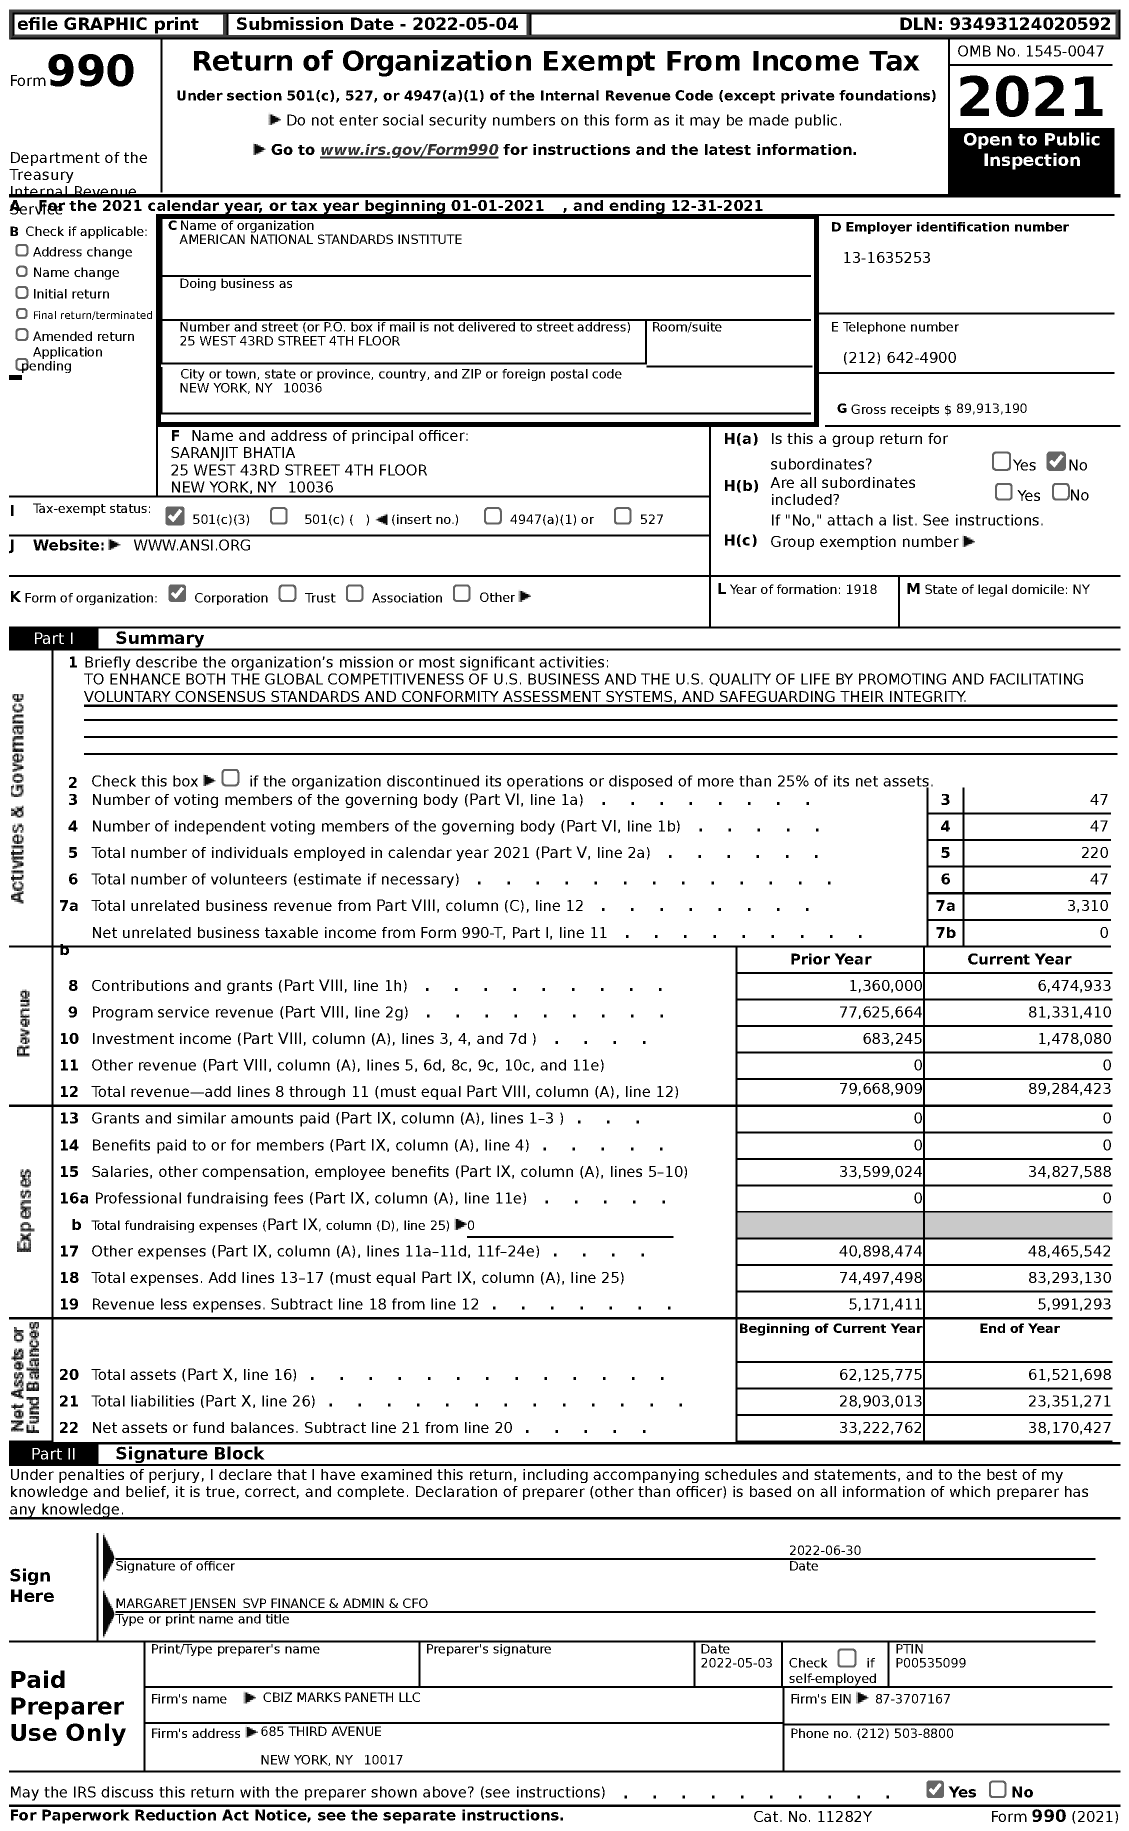 Image of first page of 2021 Form 990 for American National Standards Institute (ANSI)